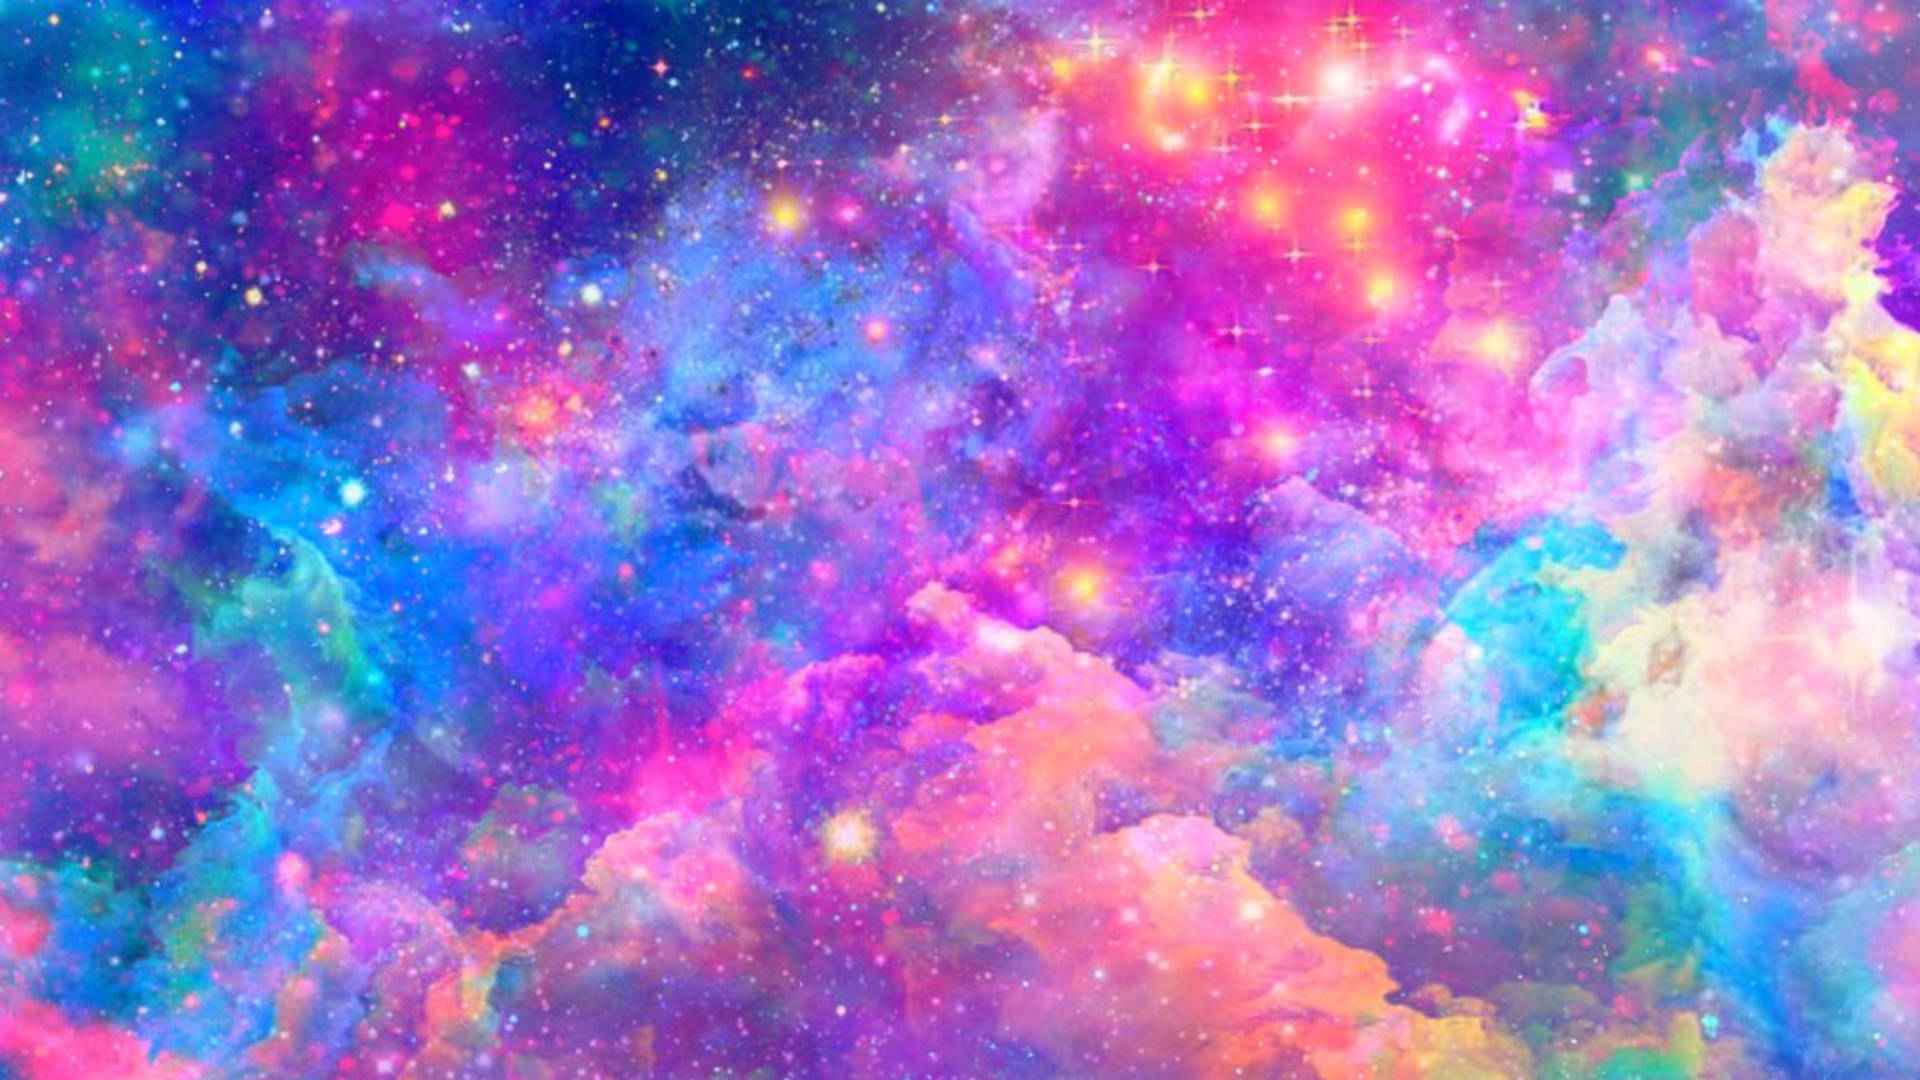 Top 999+ Rainbow Galaxy Wallpapers Full HD, 4K✅Free to Use